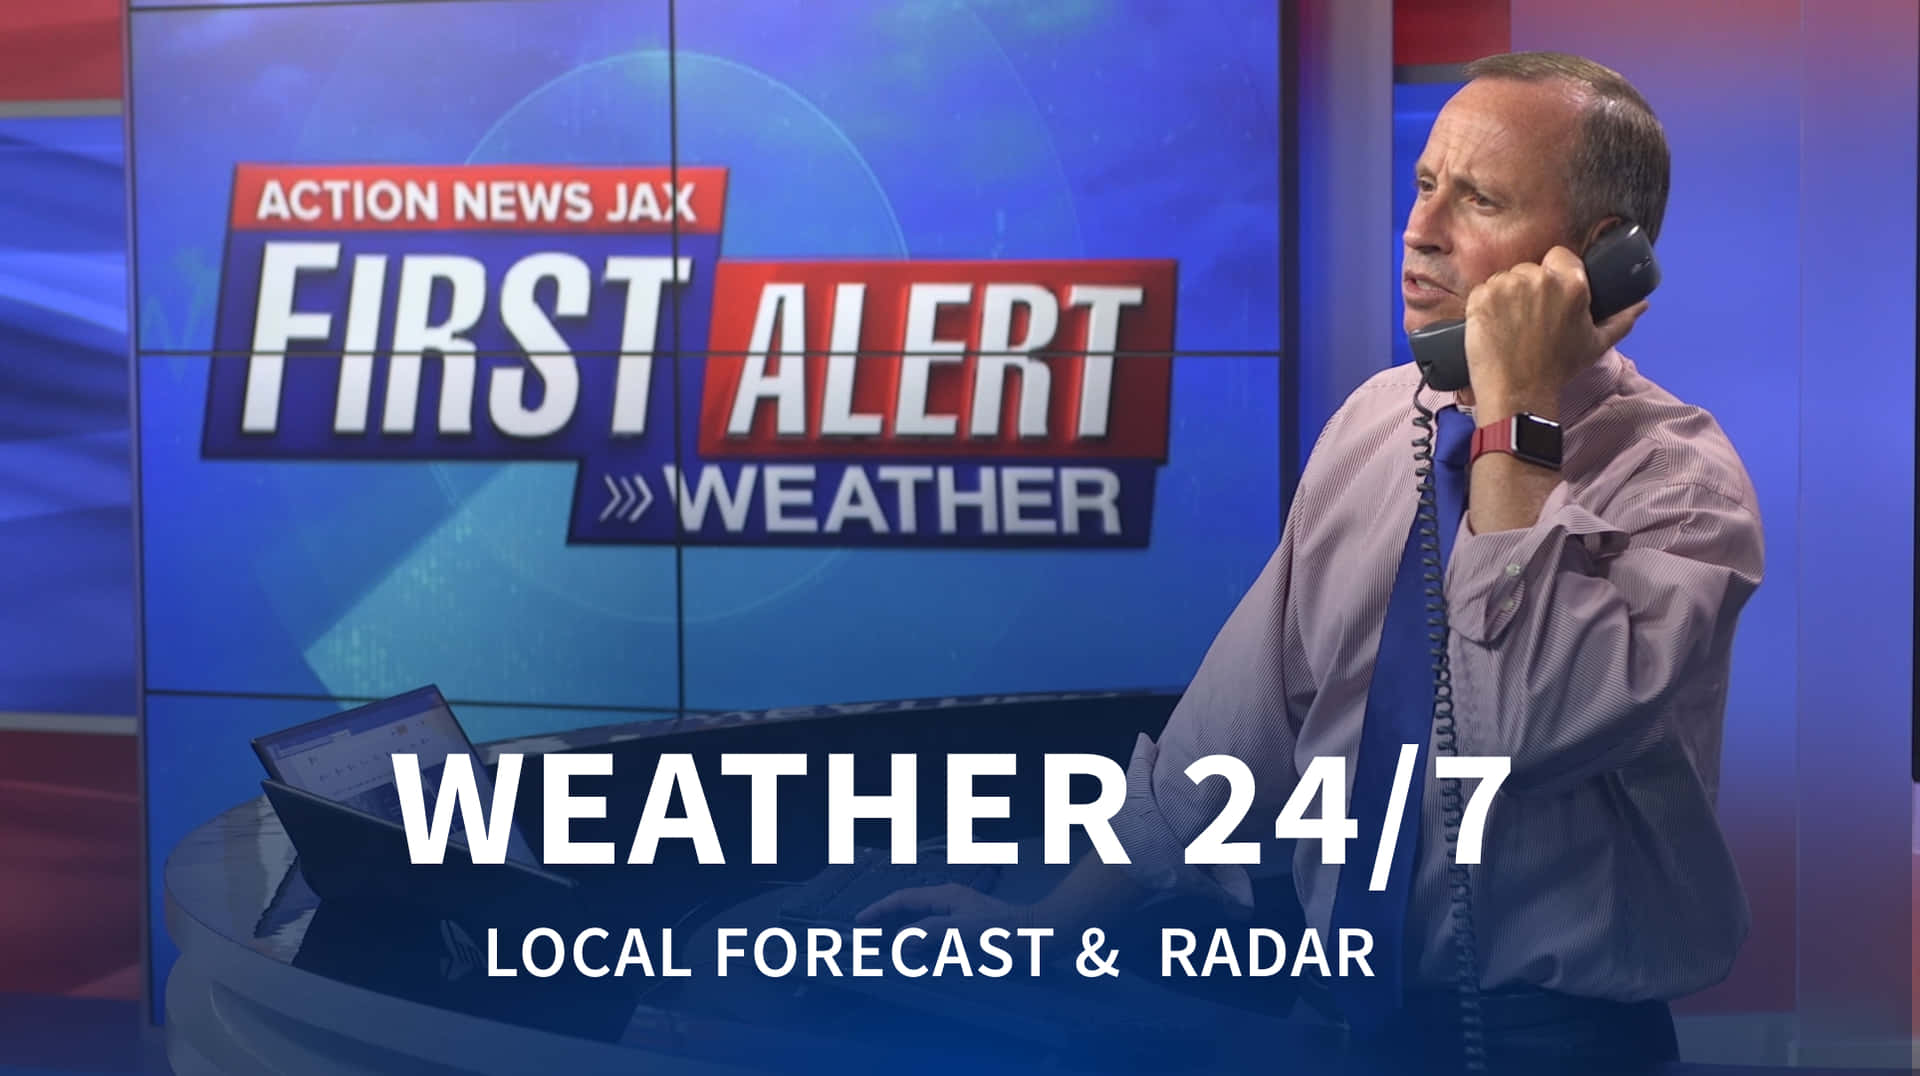 Action News Jax Weather Forecast Picture